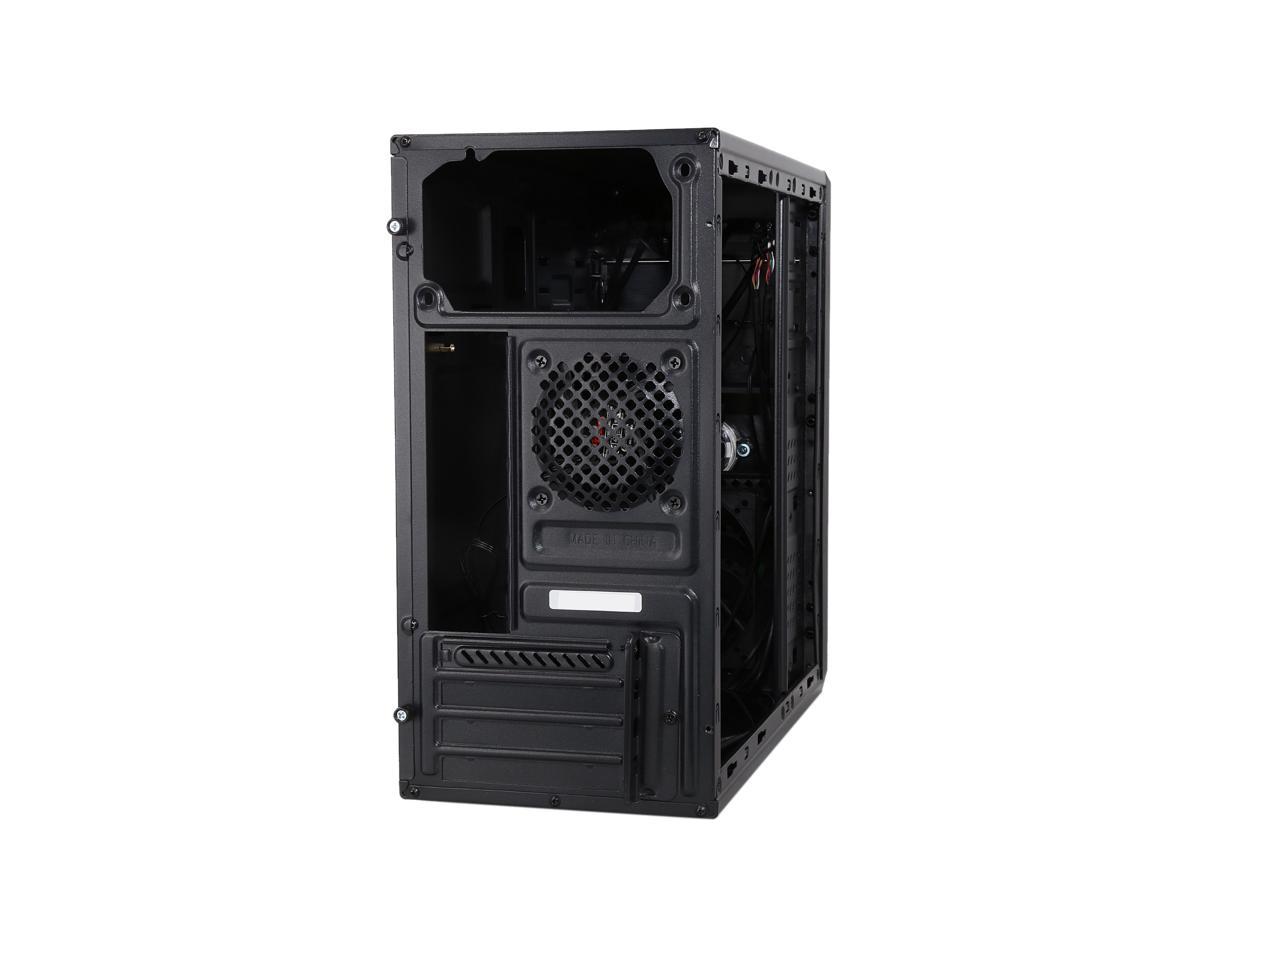 Rosewill Black Computer PC Case ATX Mini Tower Side Window and Two Fans FBM-X1 